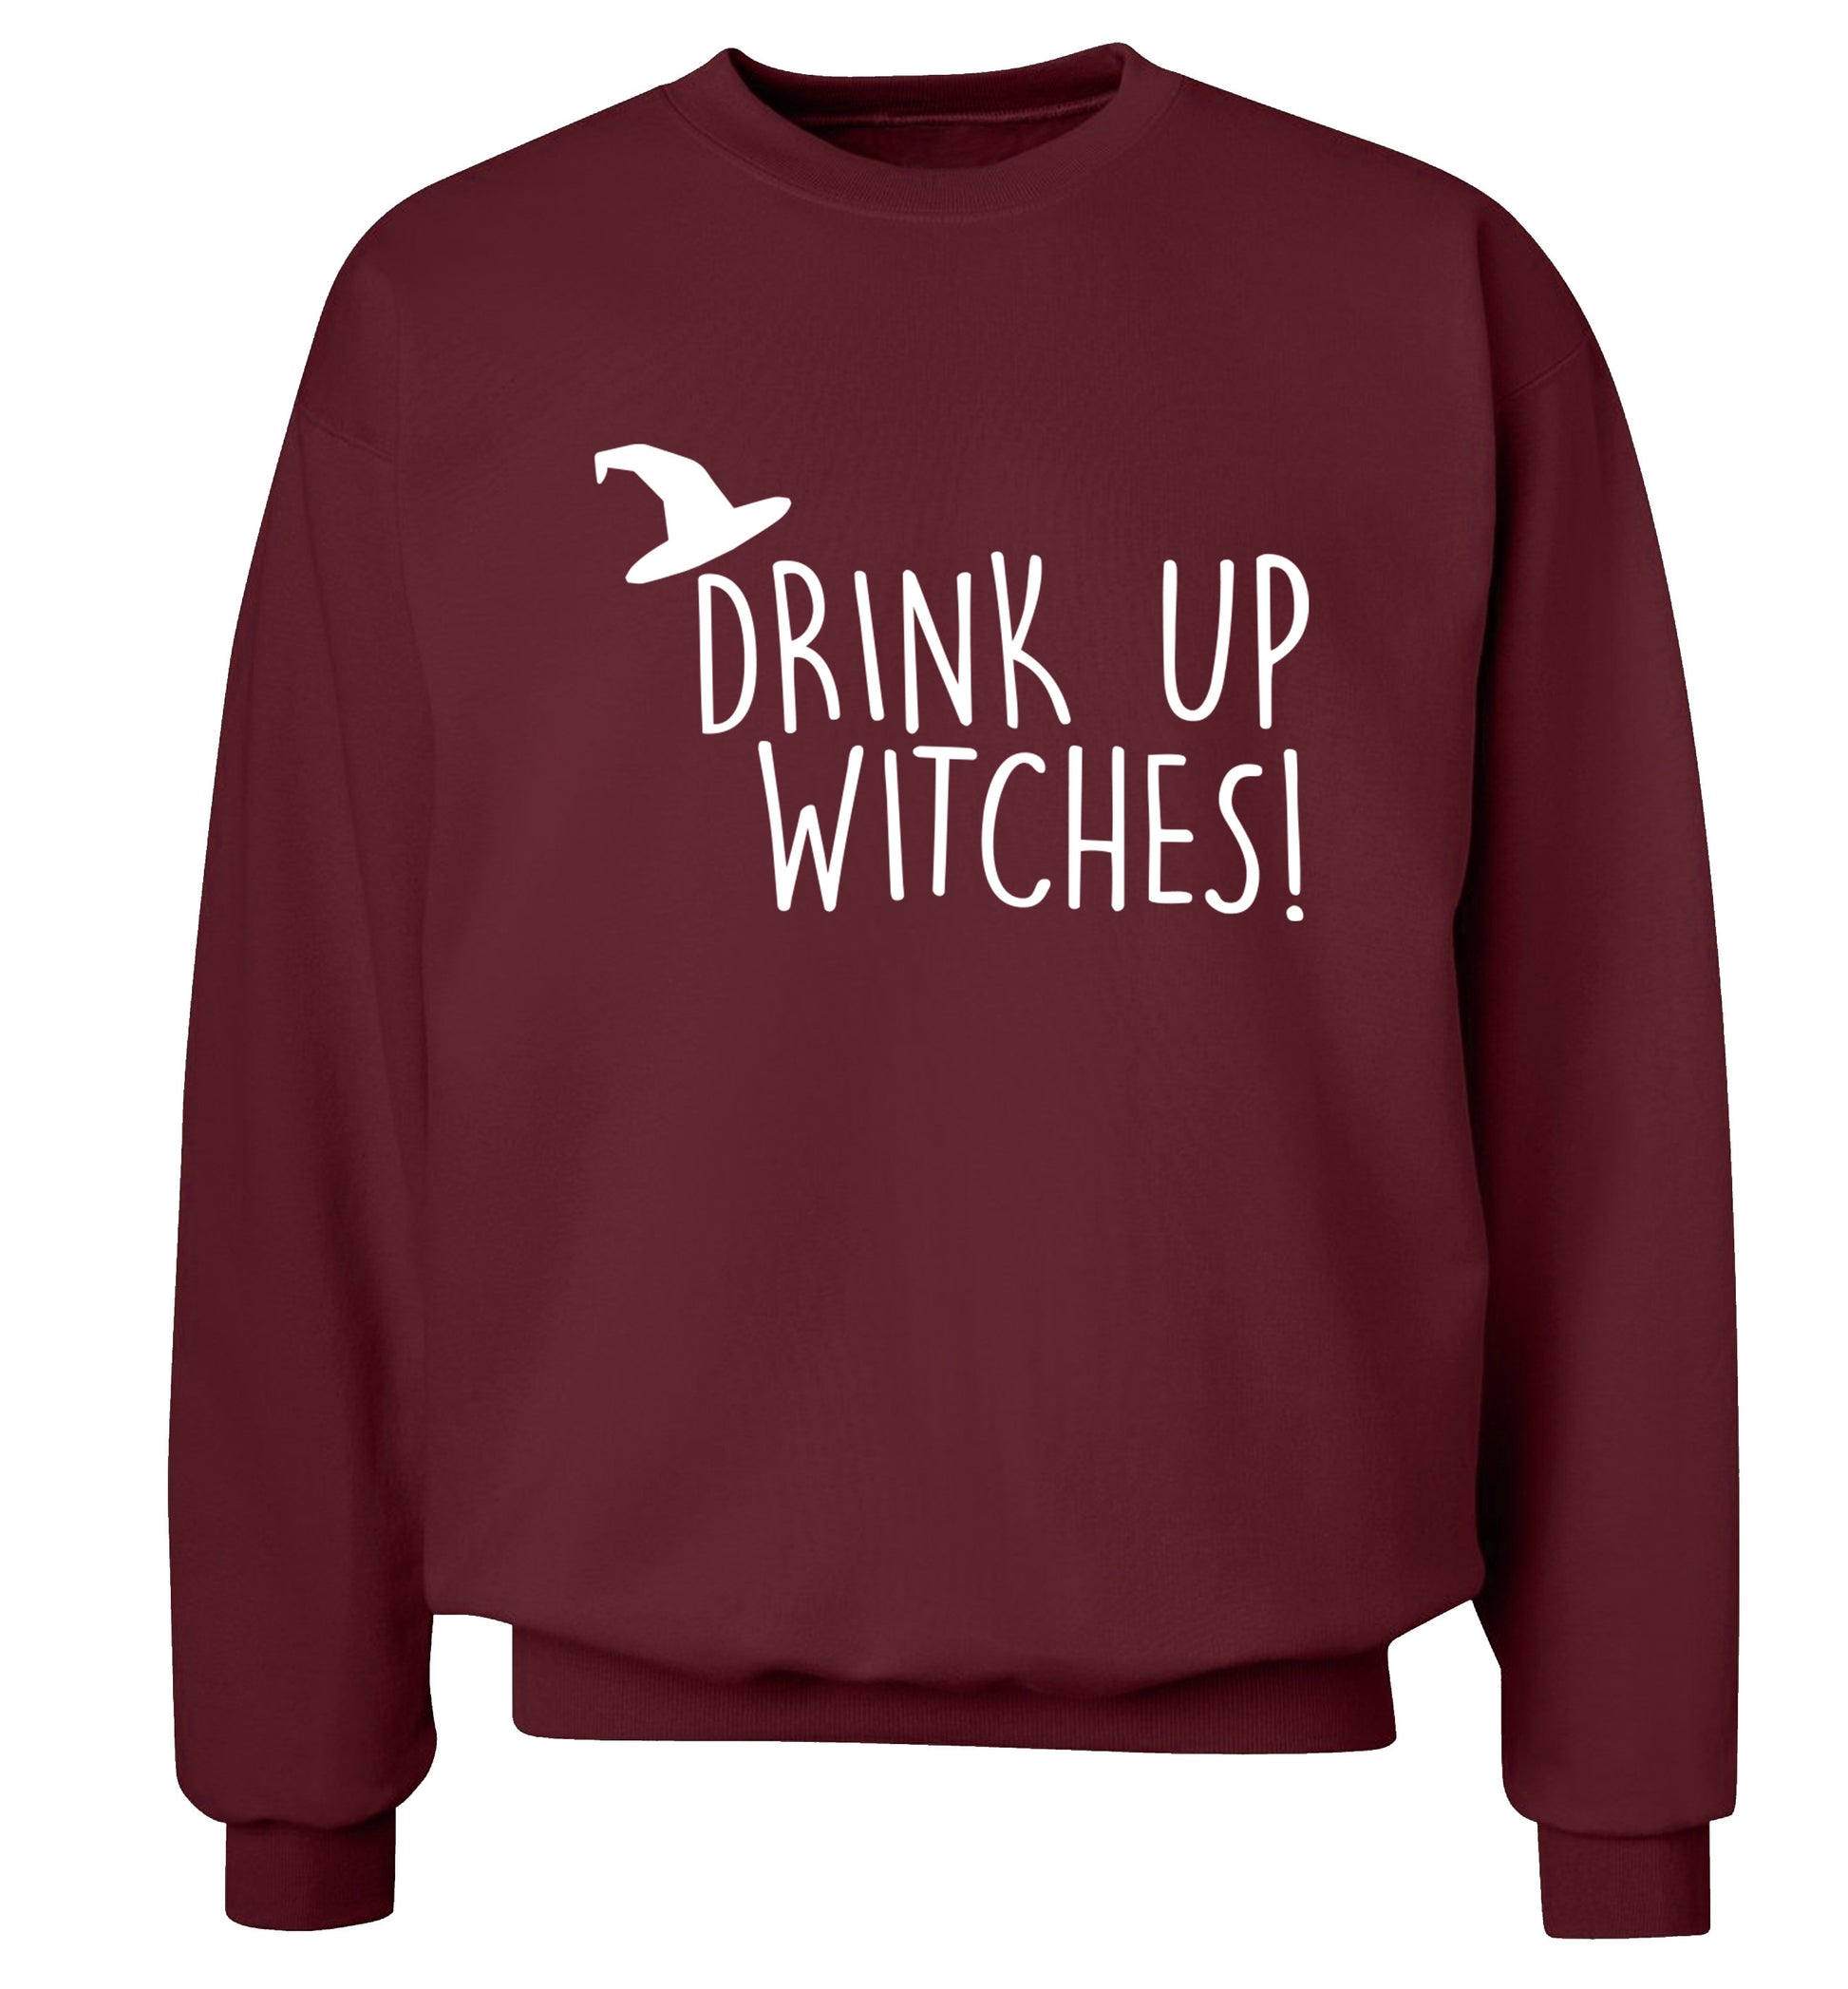 Drink up witches Adult's unisex maroon Sweater 2XL